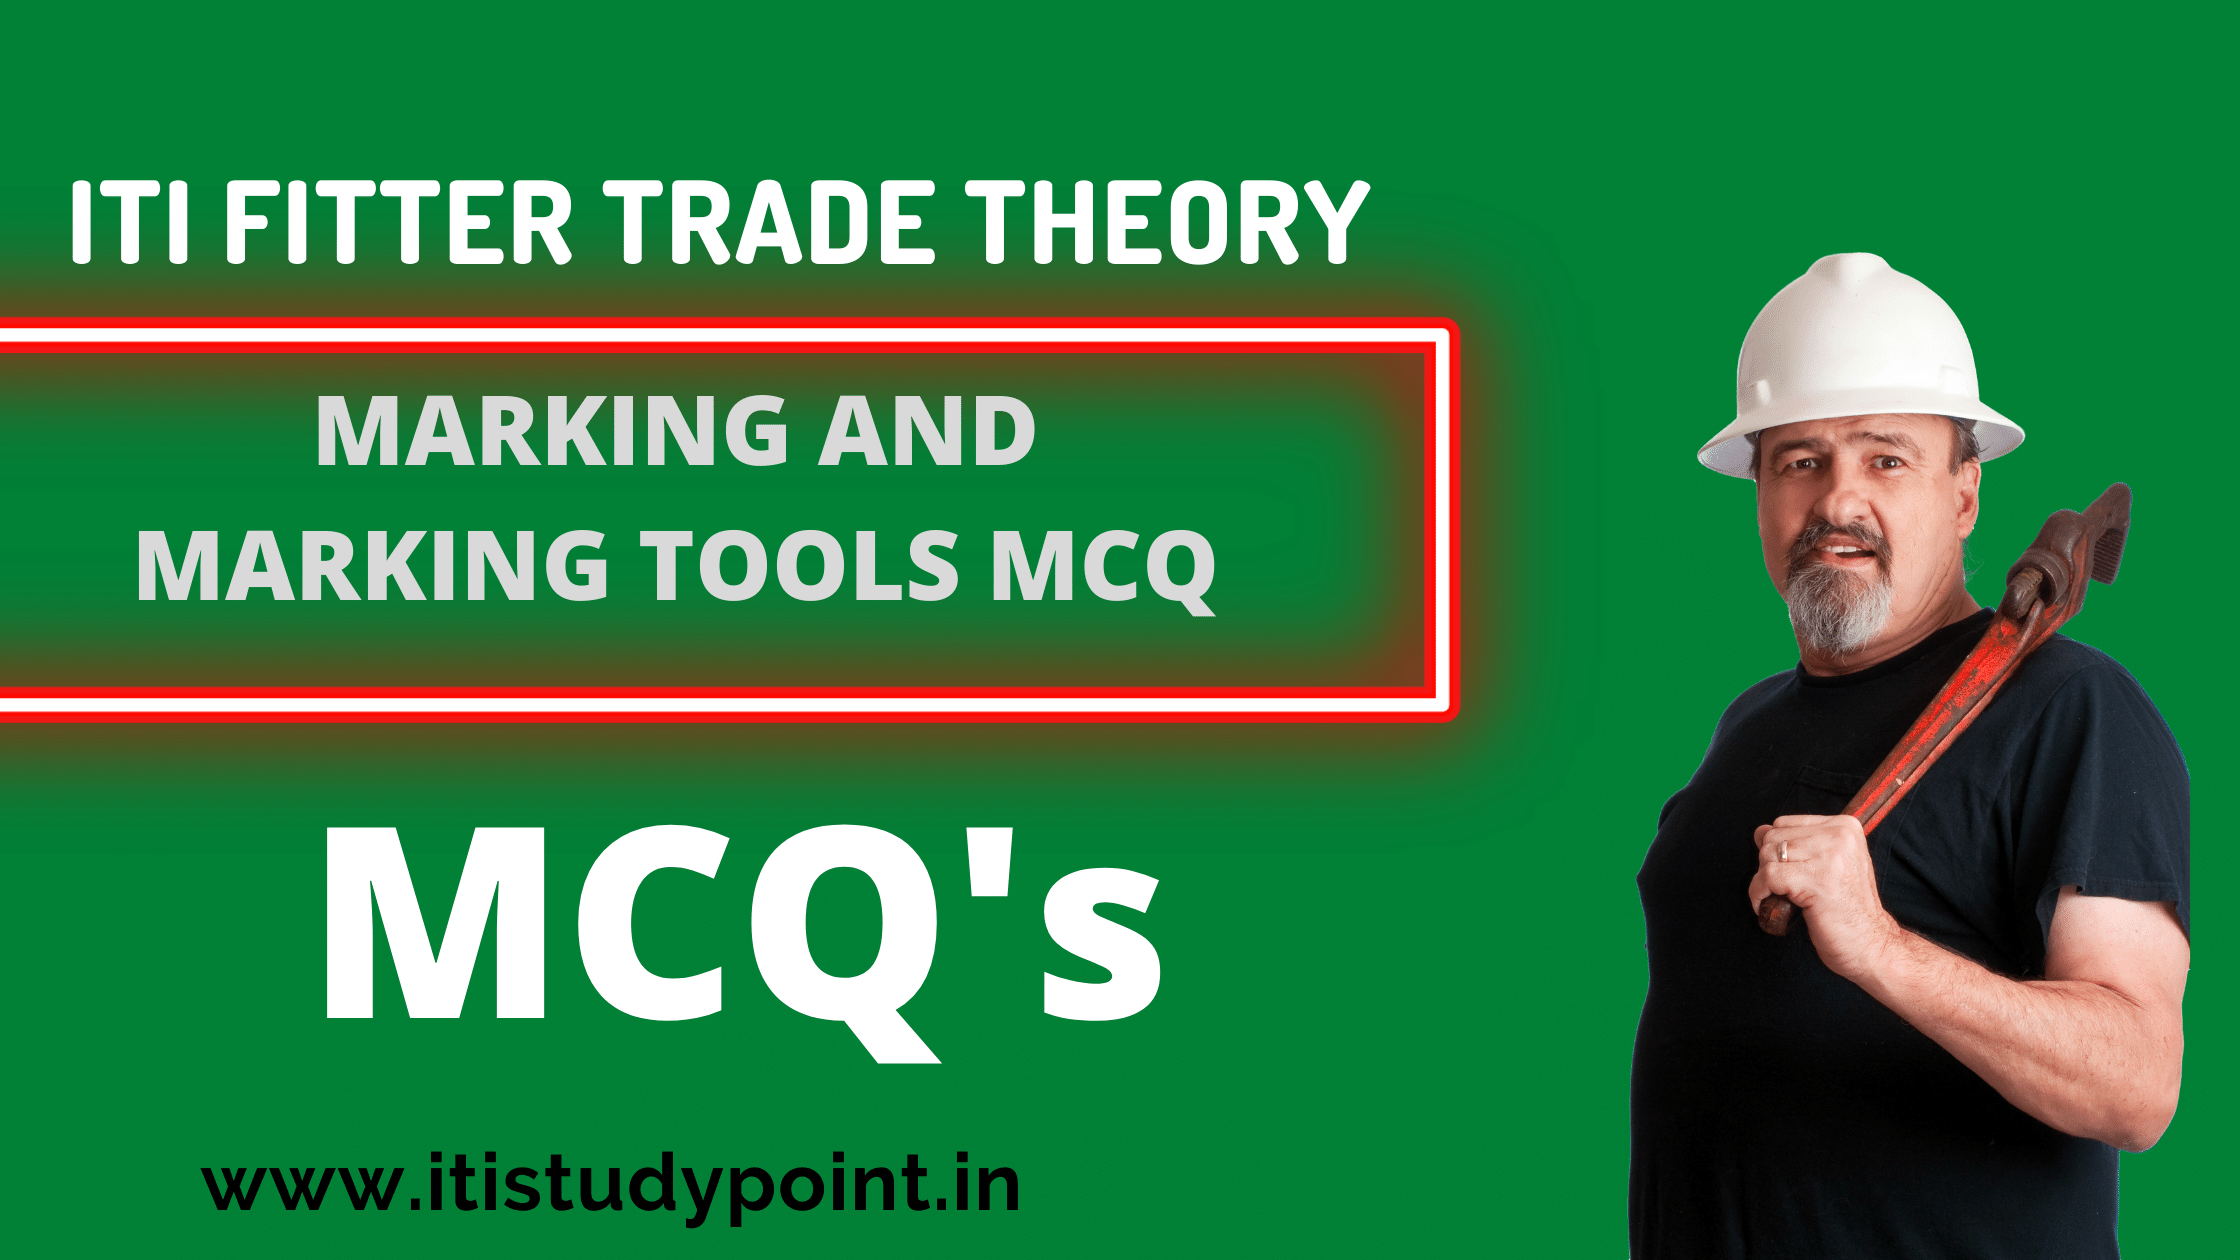 MARKING AND MARKING TOOLS MCQ